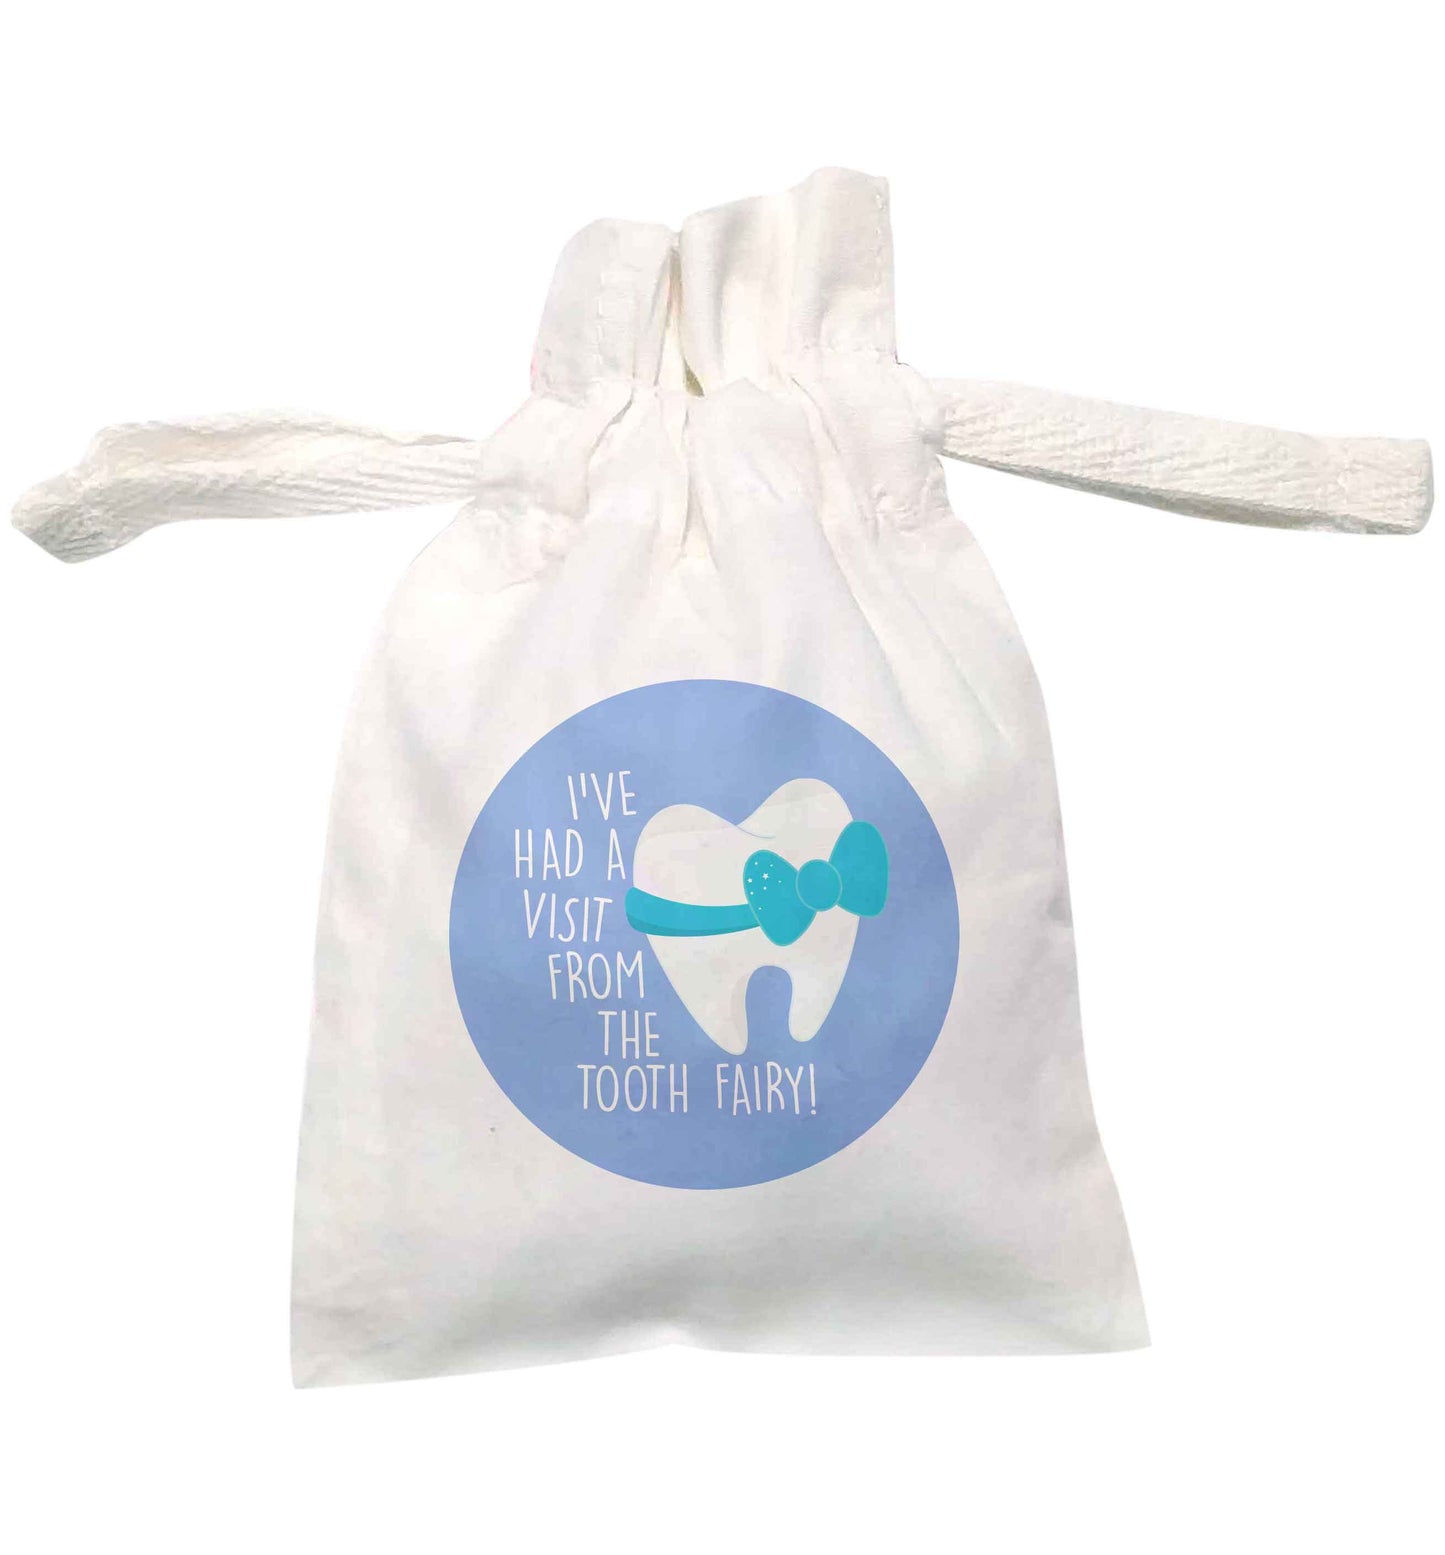 I've had a visit from the tooth fairy | XS drawstring pouch | Organic Cotton Bag